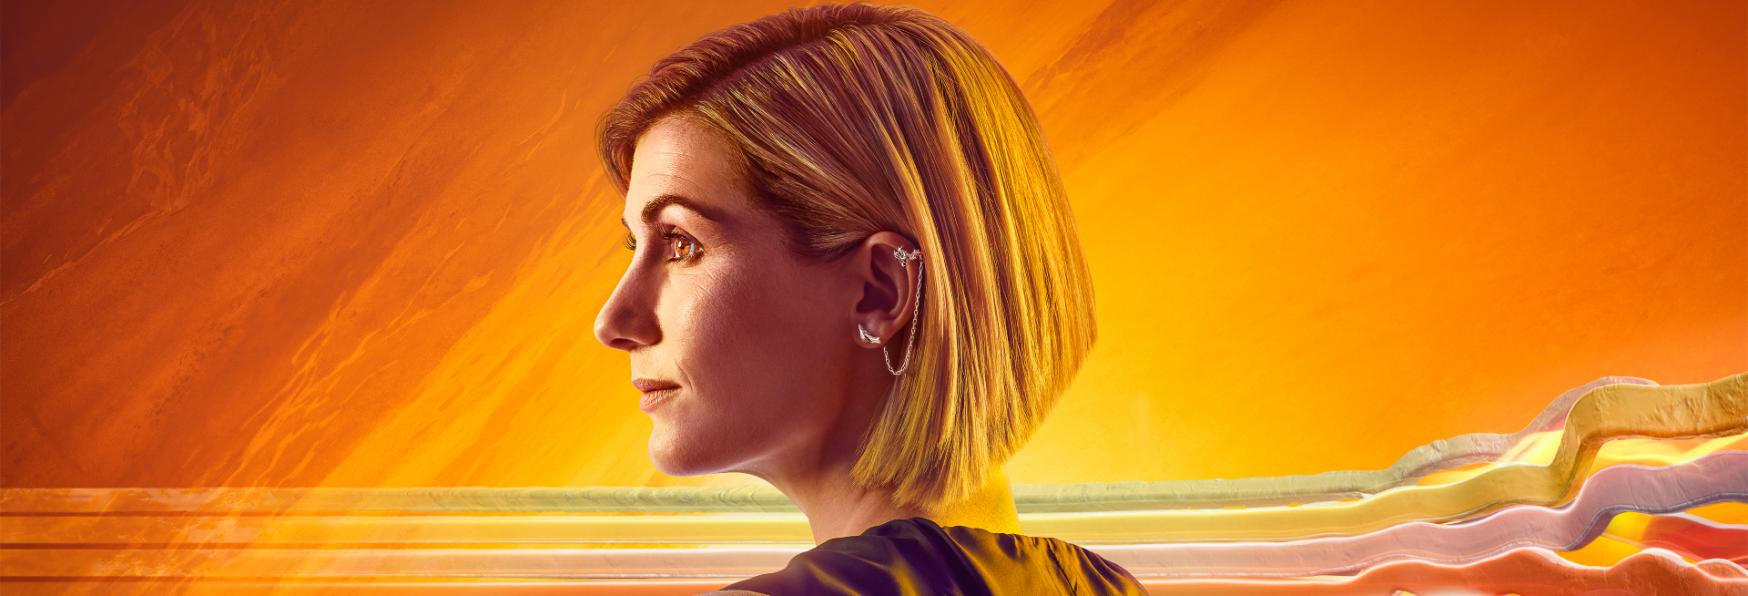 Doctor Who 13: Russell T Davies parla dell'Ultimo Episodio di Jodie Whittaker